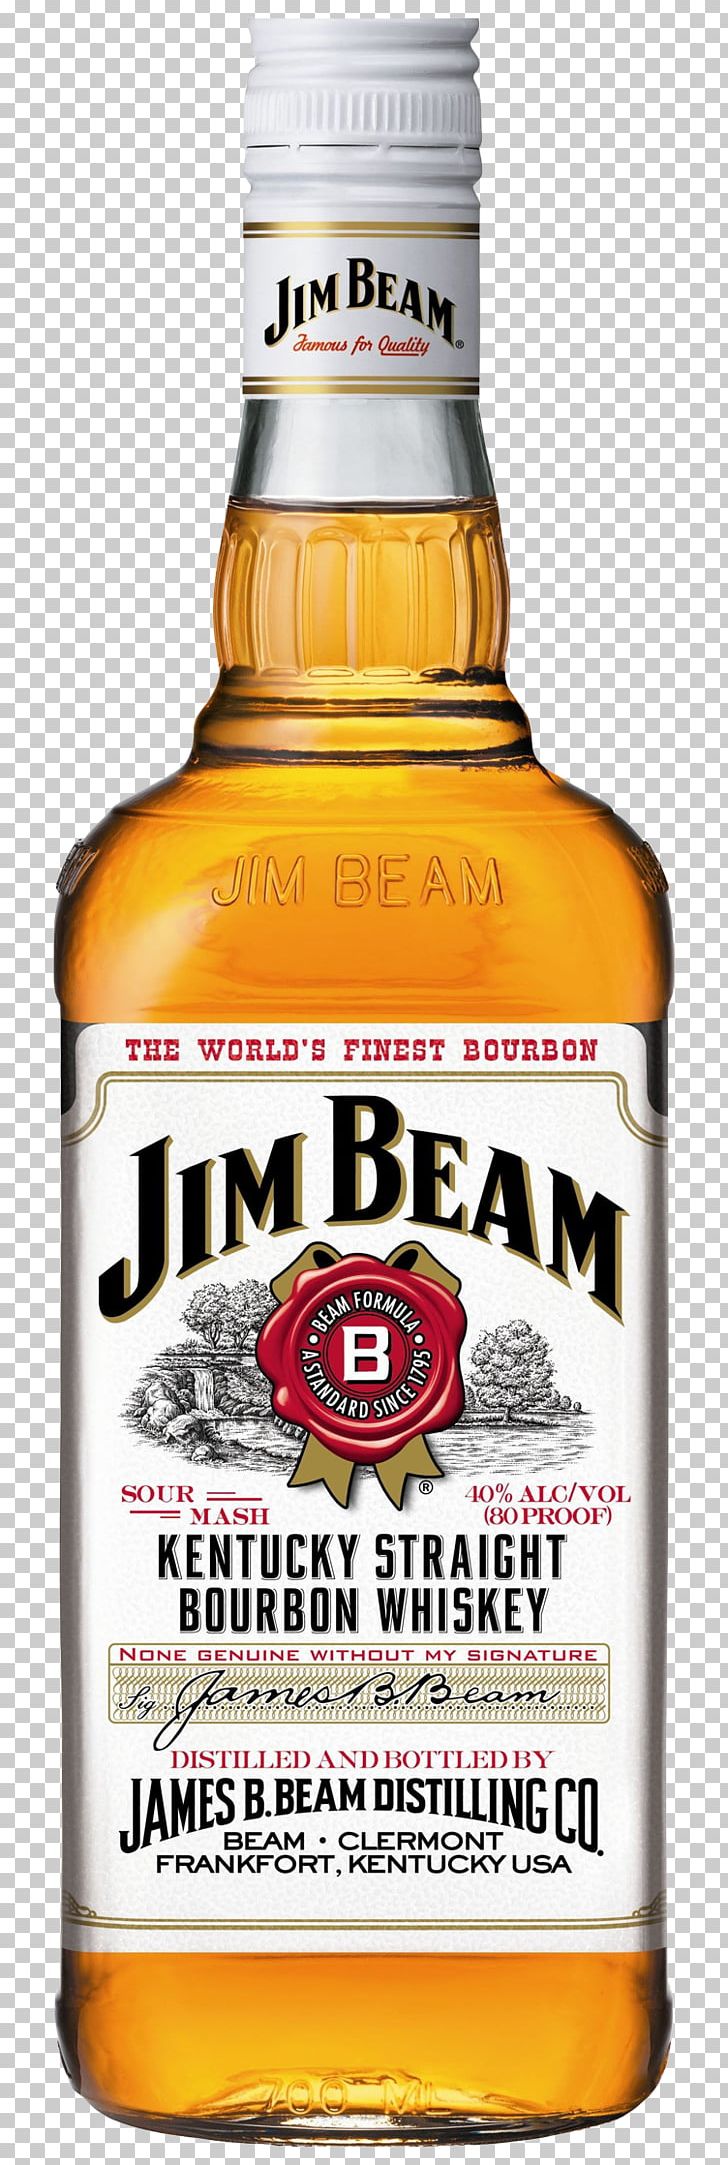 Bourbon Whiskey Distilled Beverage American Whiskey Jim Beam White Label PNG, Clipart, American Whiskey, Bourbon Whiskey, Distilled Beverage, Jim Beam, White Label Free PNG Download